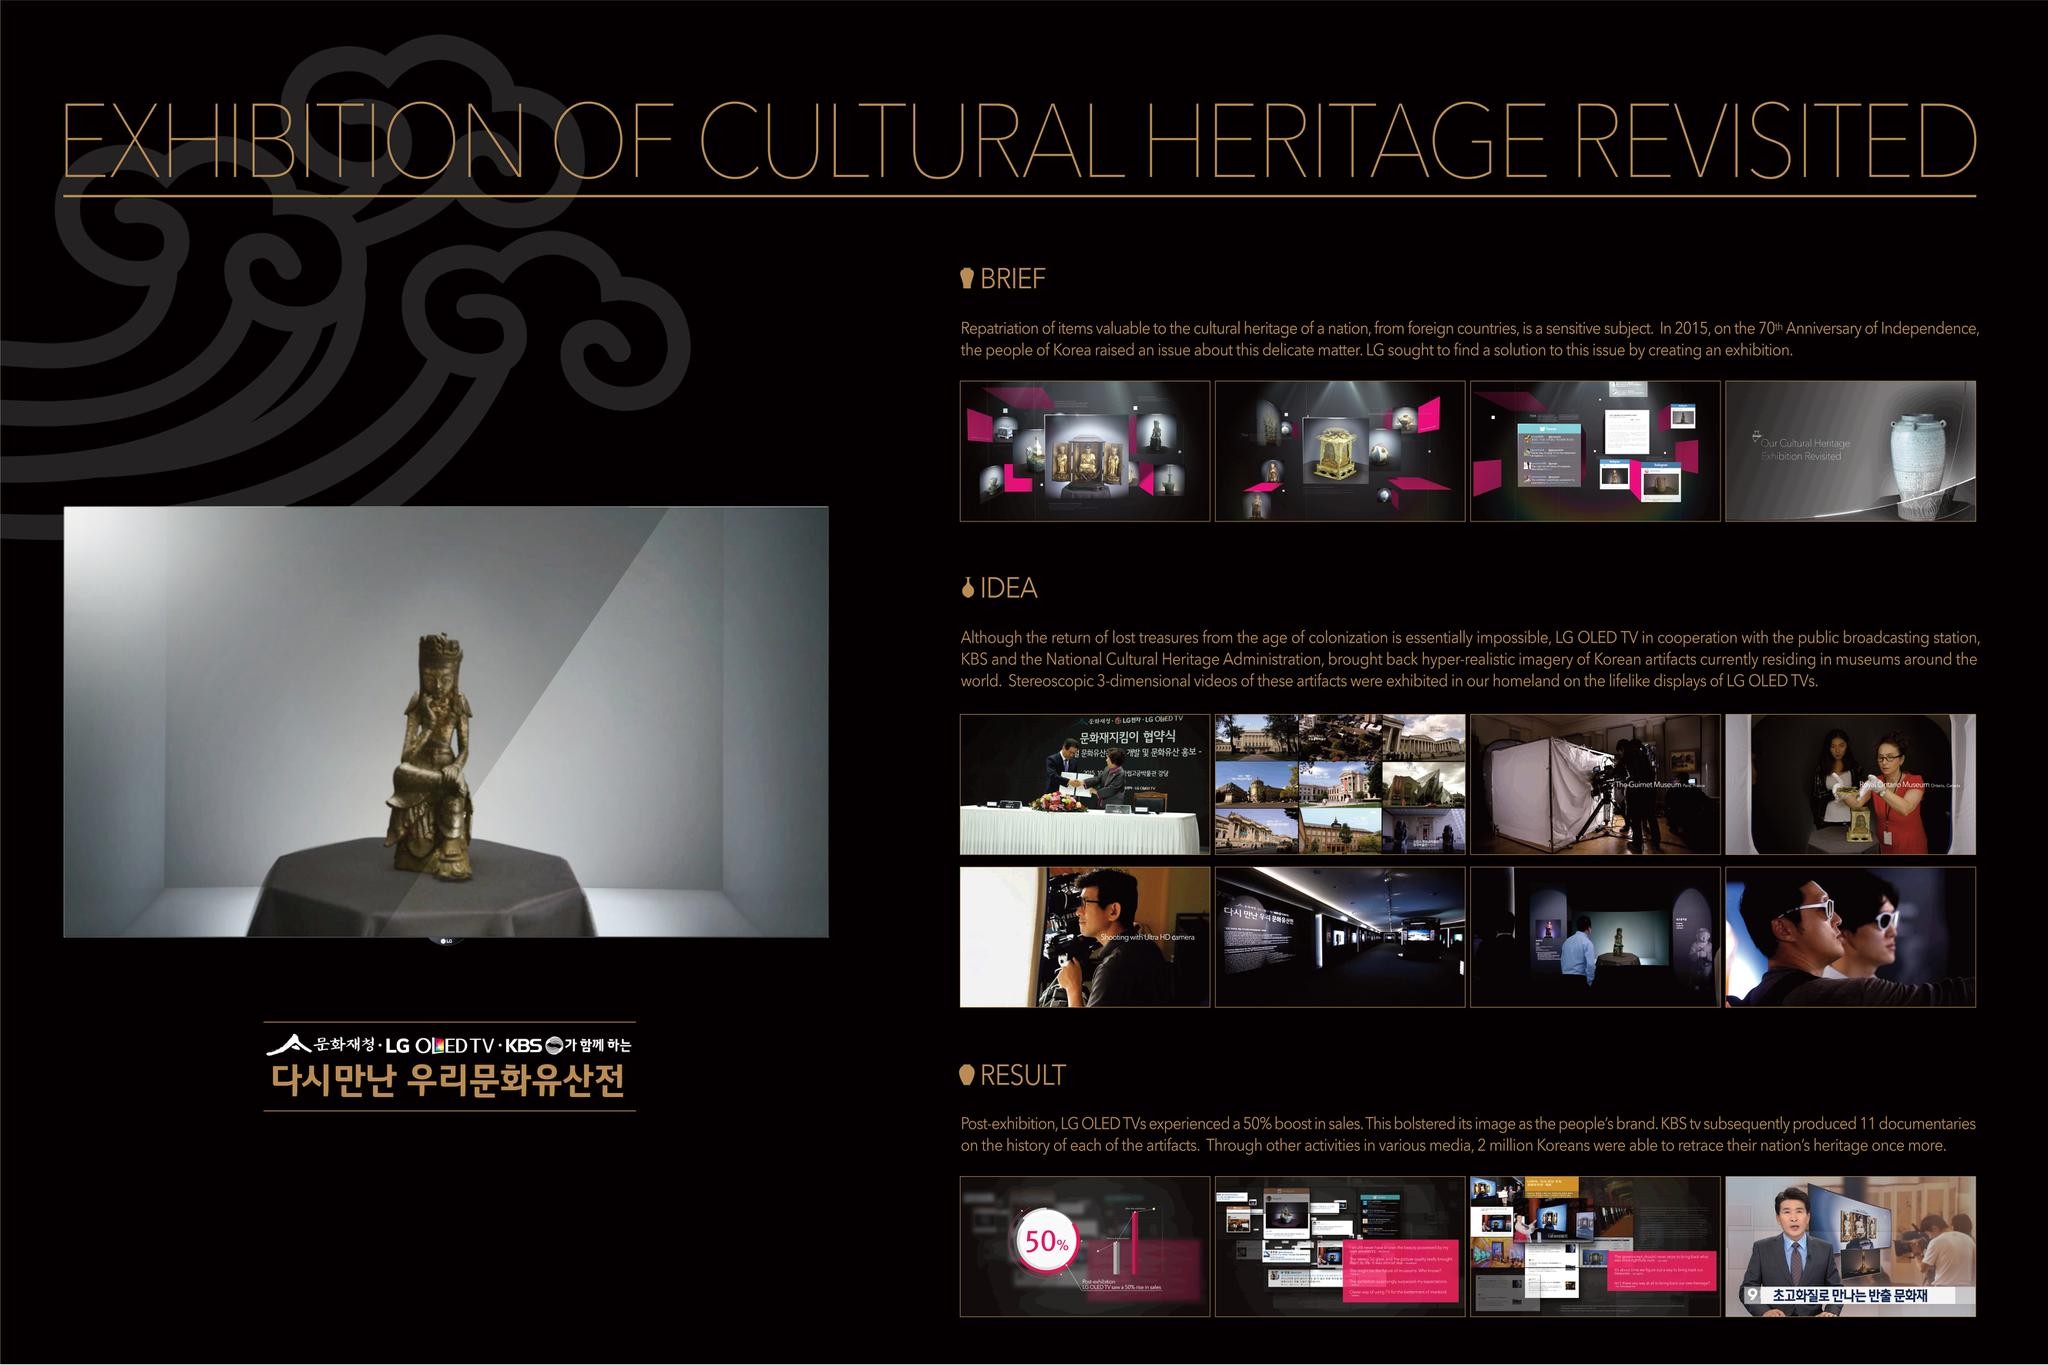 EXHIBITION OF CULTURAL HERITAGE REVISITED